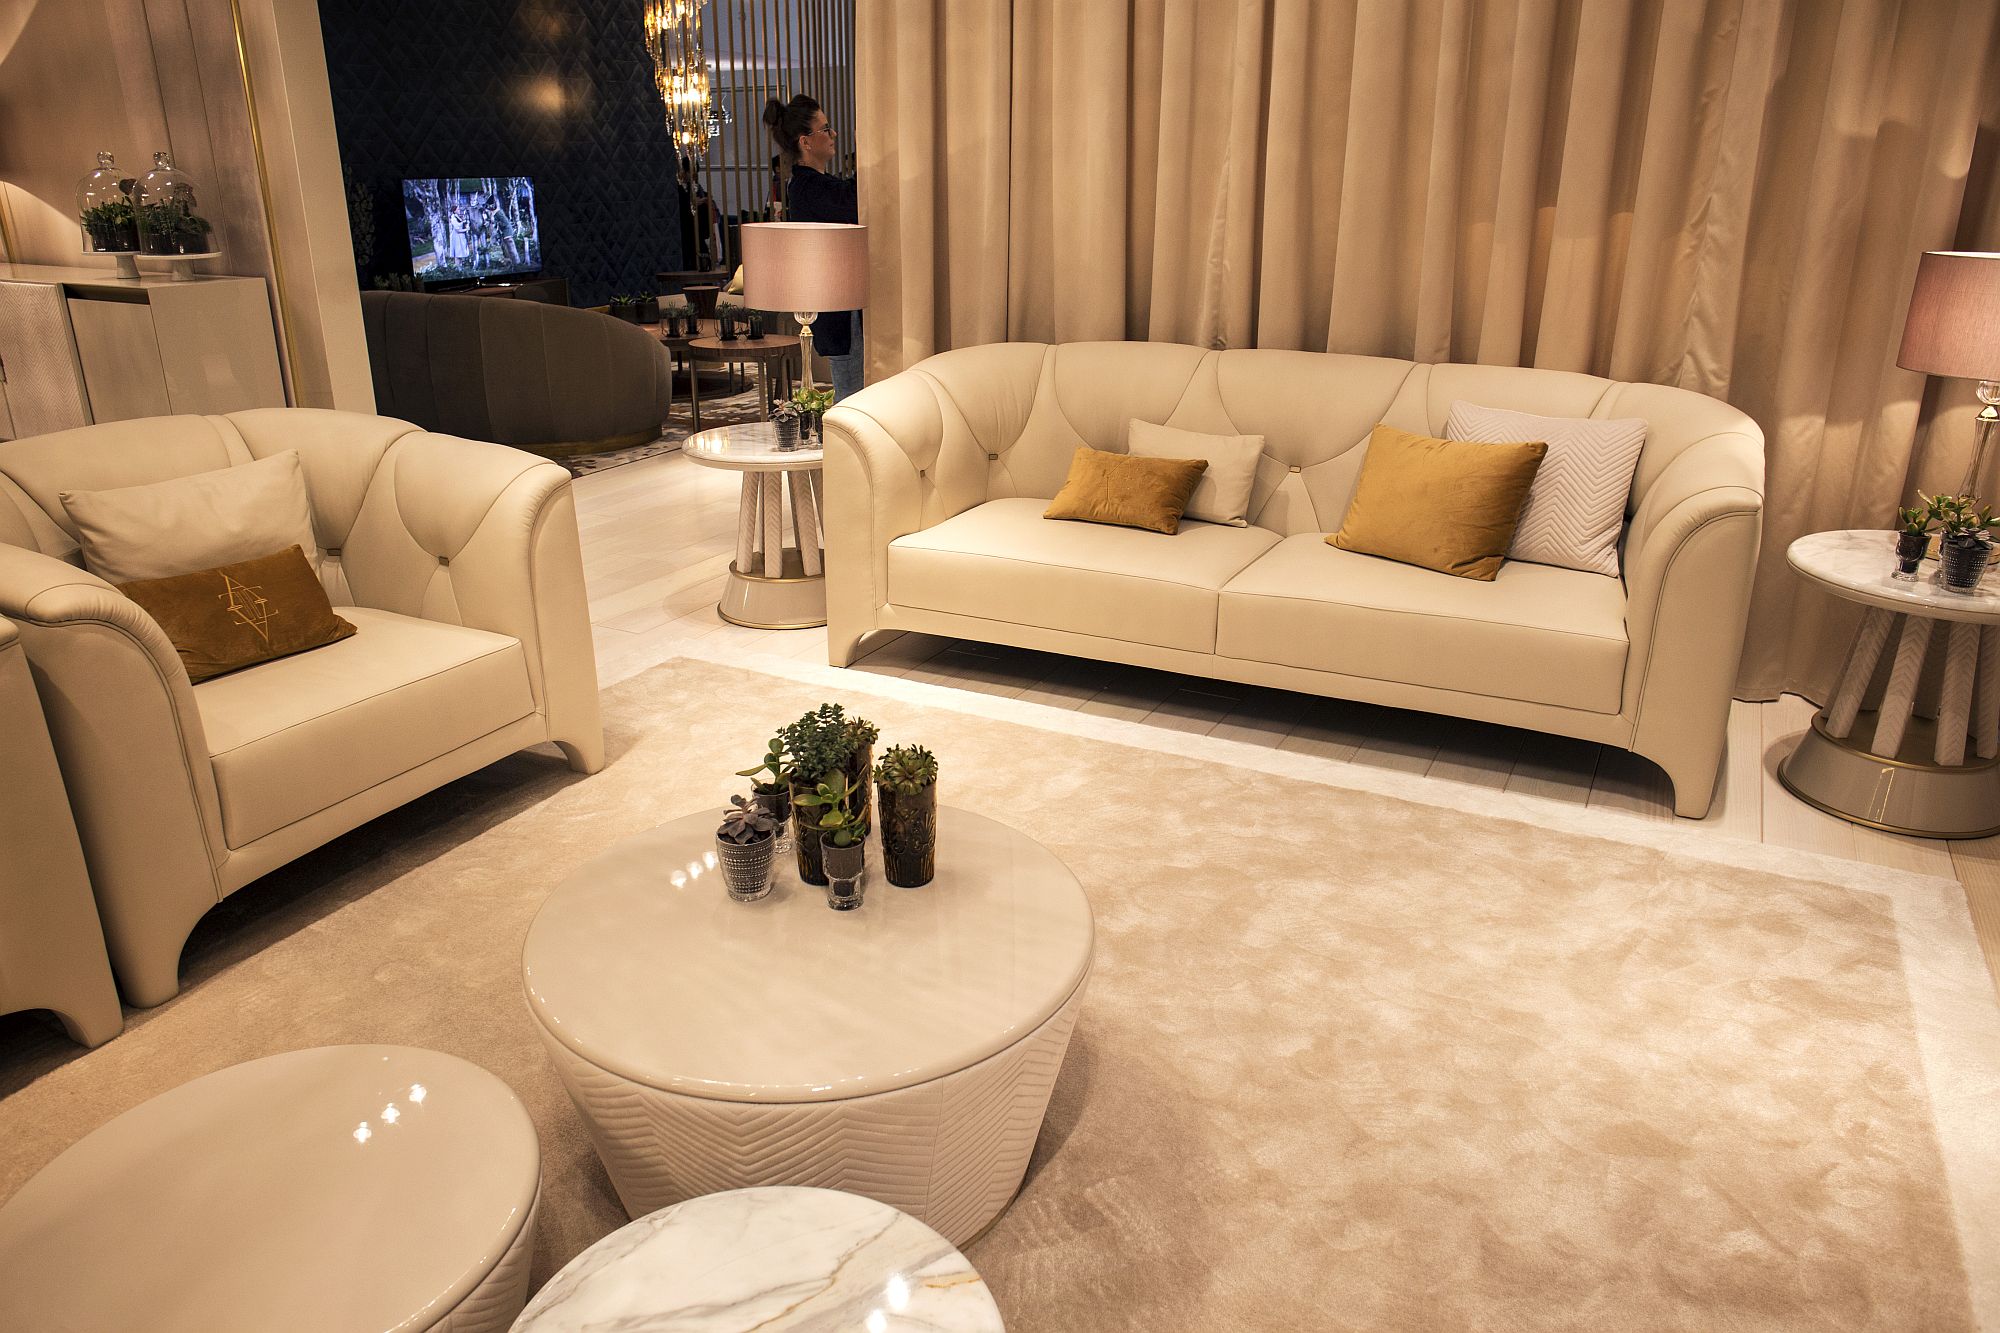 Plush-couch-in-white-with-accent-pillows-in-gold